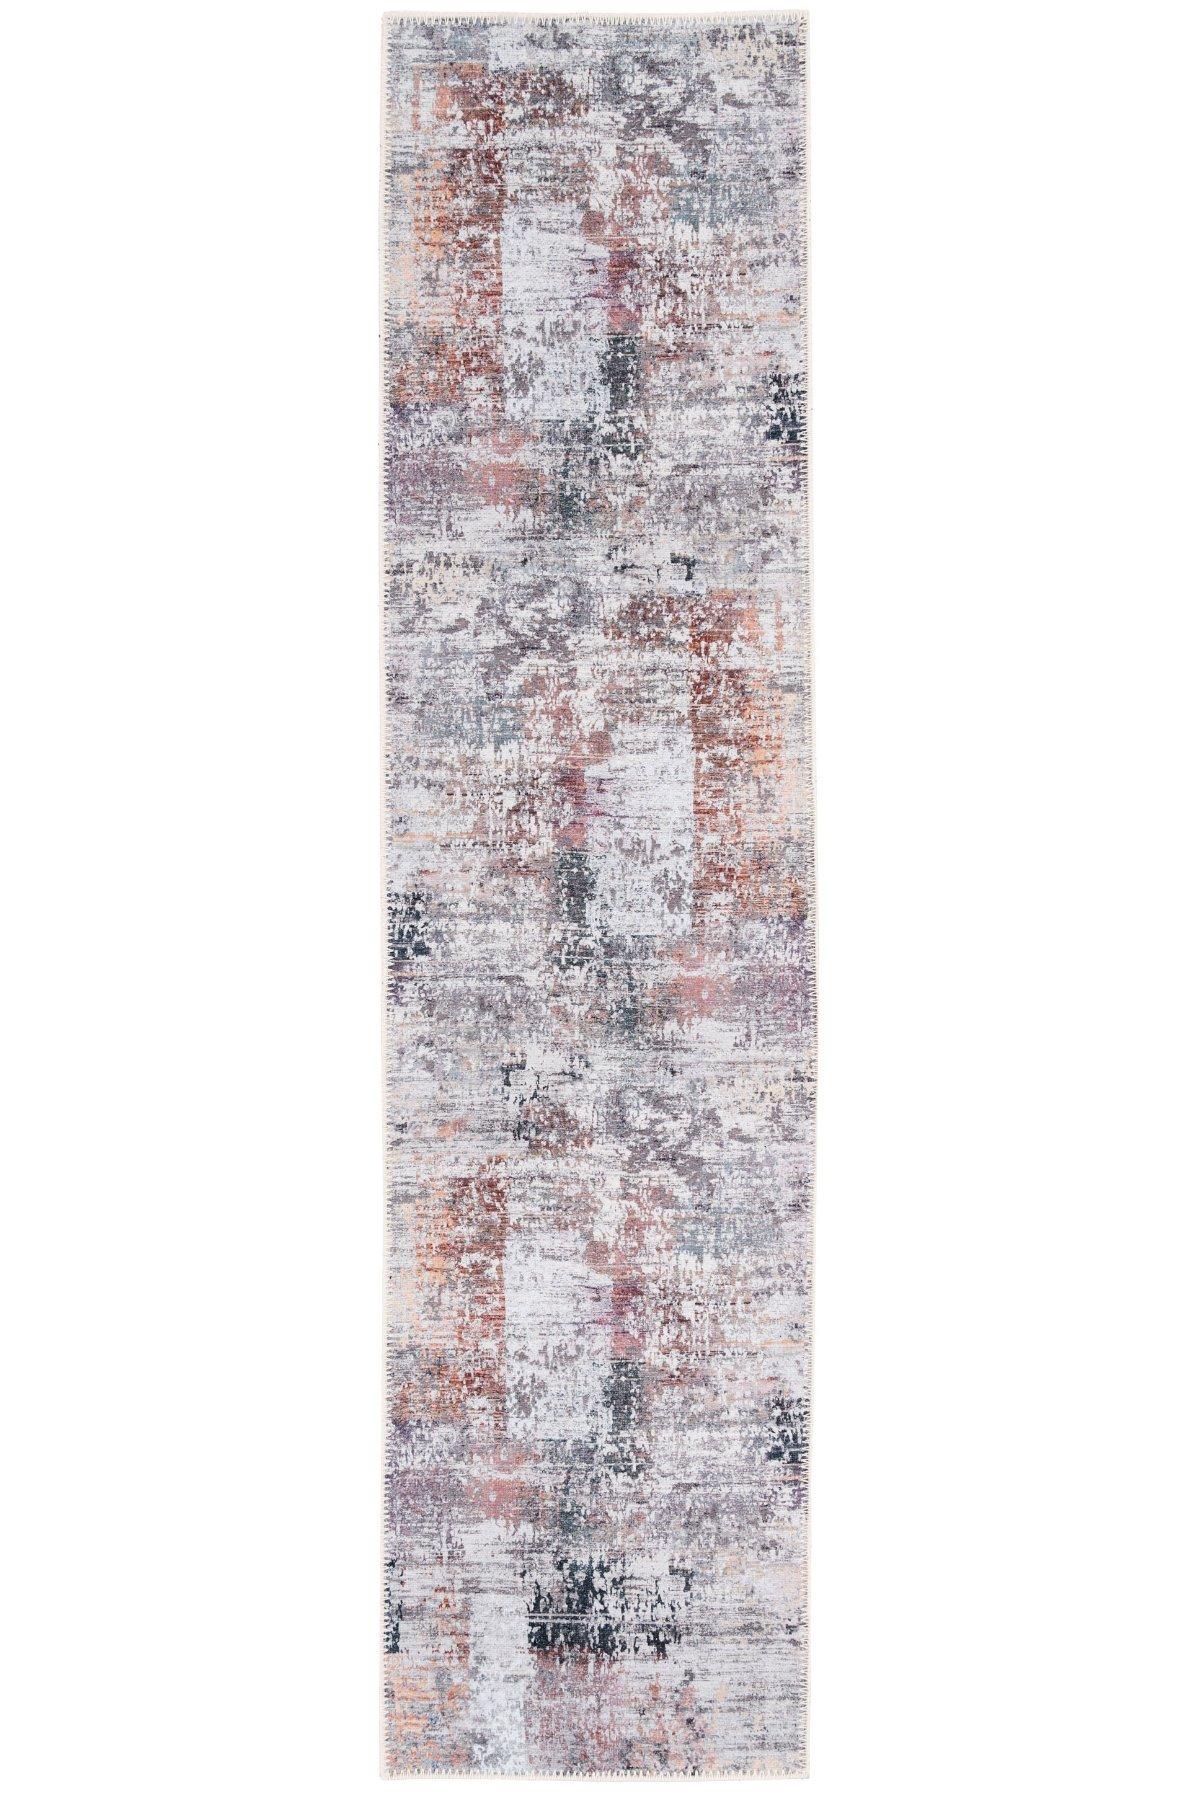 Grey Distressed Abstract Hallway Runner Rug Non Slip & Washable